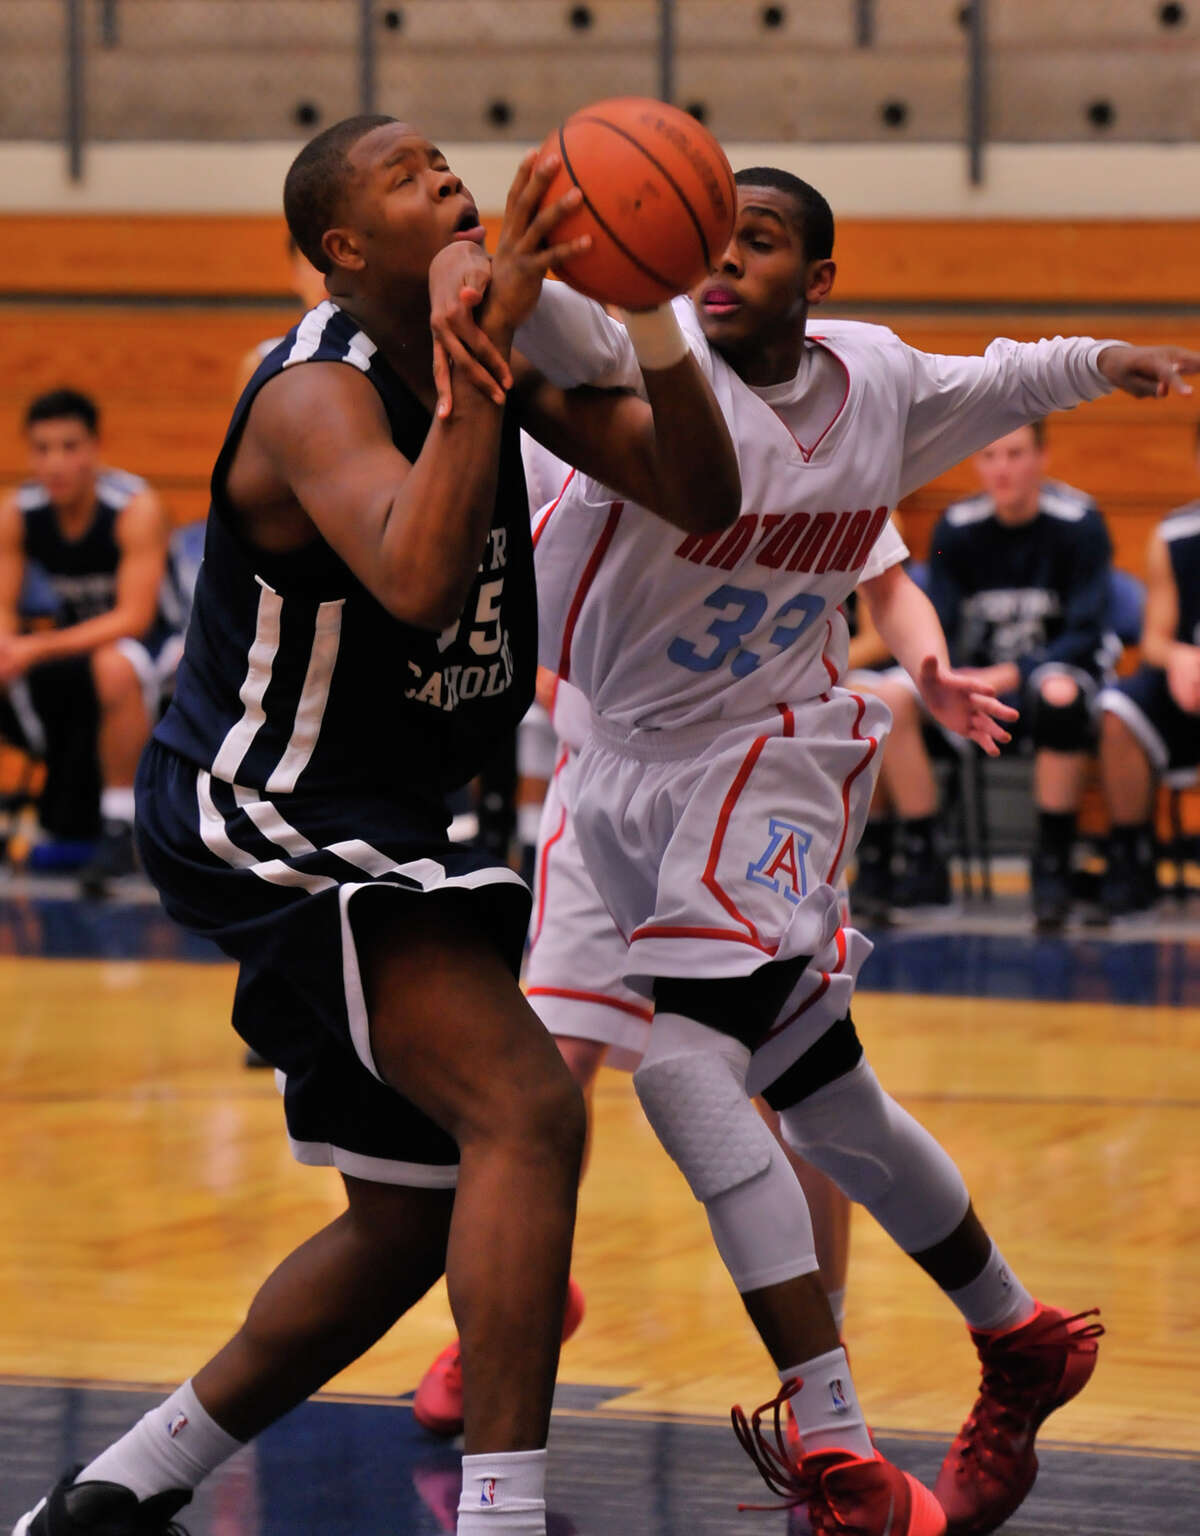 Central Catholic's Tony Lewis (left) is fouled by Antonian's Jamel Bradley during their Feb. 6, 2014 game. The Buttons won 66-55.